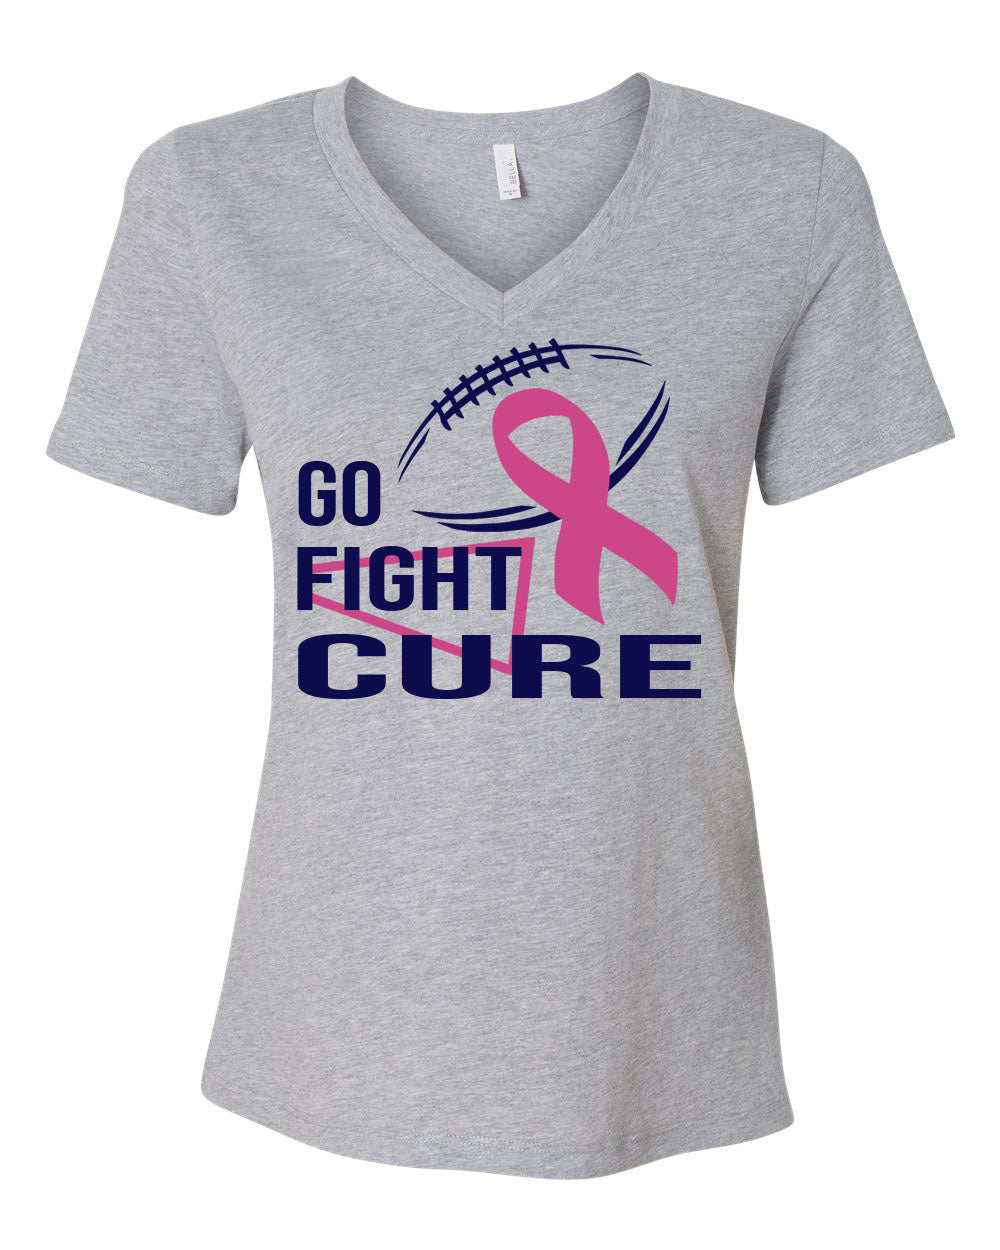 Go fight cure Cheer V-neck T-Shirt